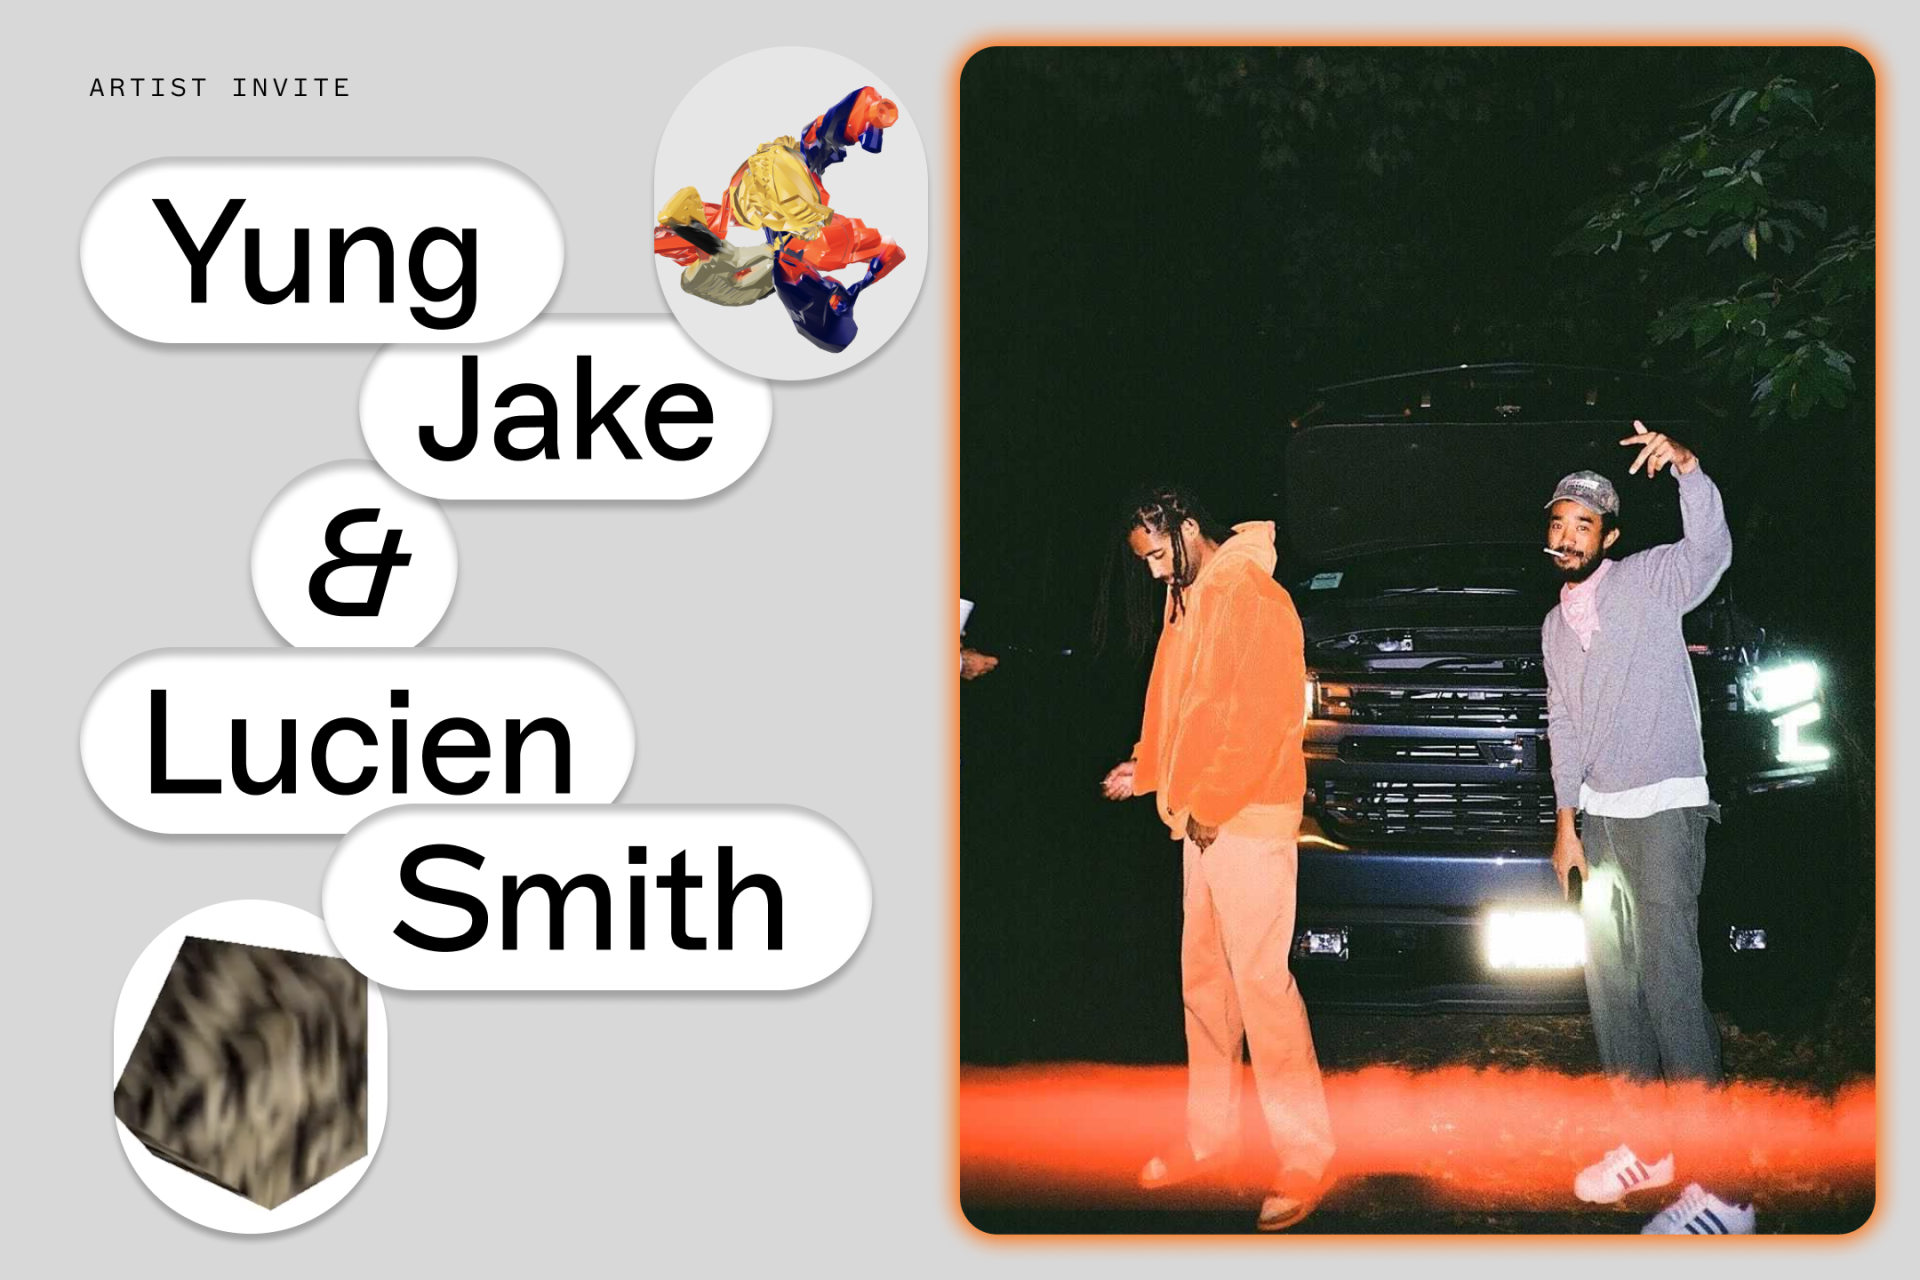 Artist Invite: Yung Jake and Lucien Smith